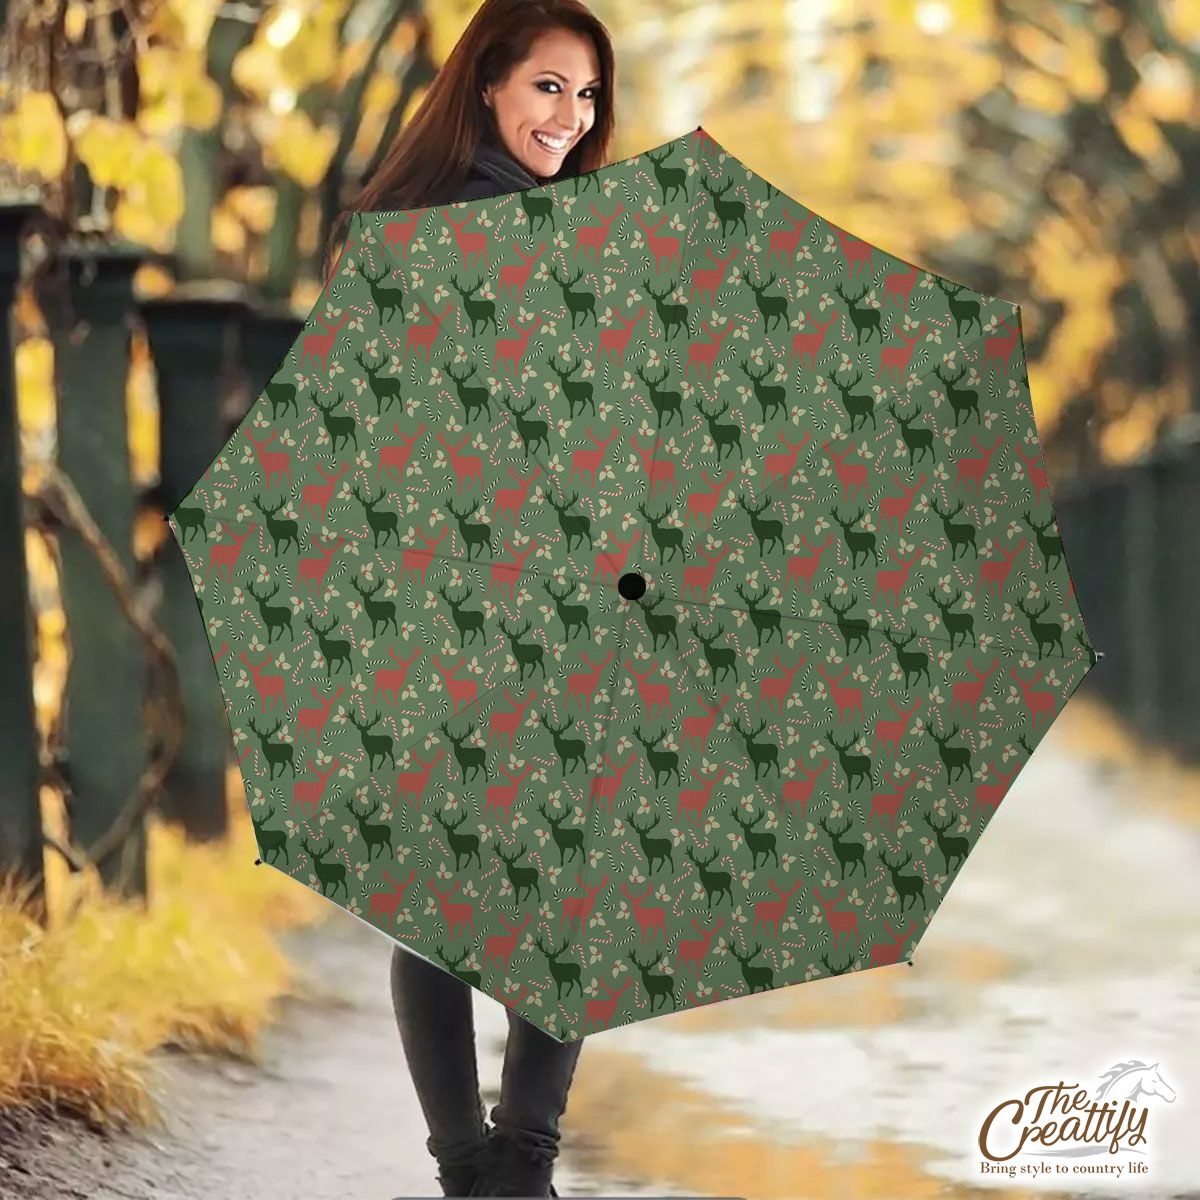 Reindeer, Christmas Flowers And Candy Canes Umbrella